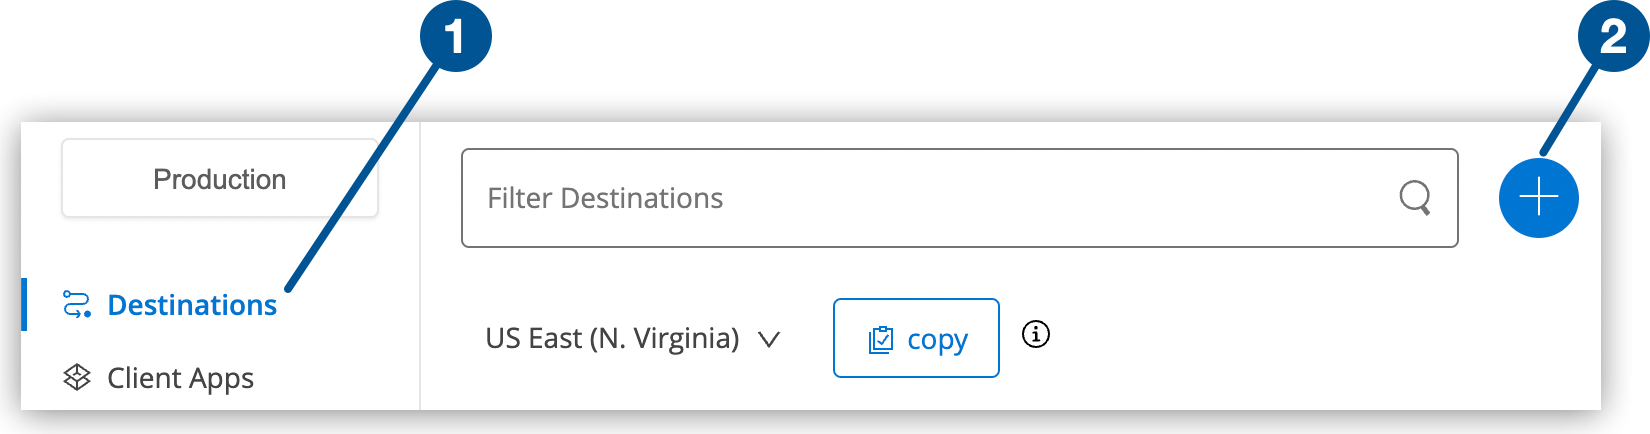 Destinations option and the Add icon